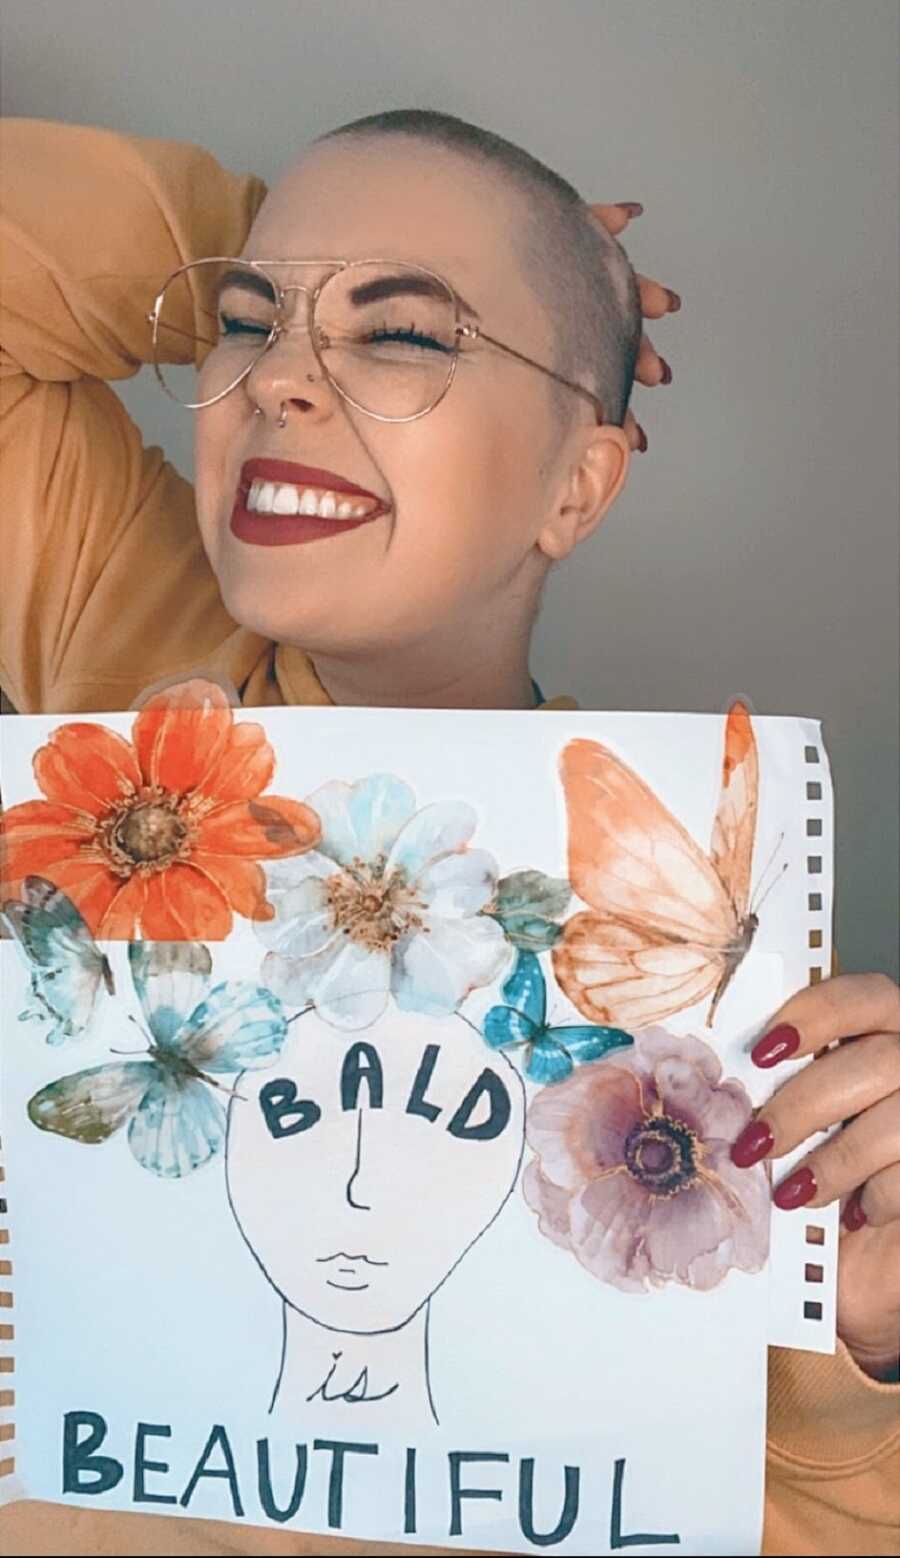 A woman wearing glasses holds up a sign to raise baldness awareness